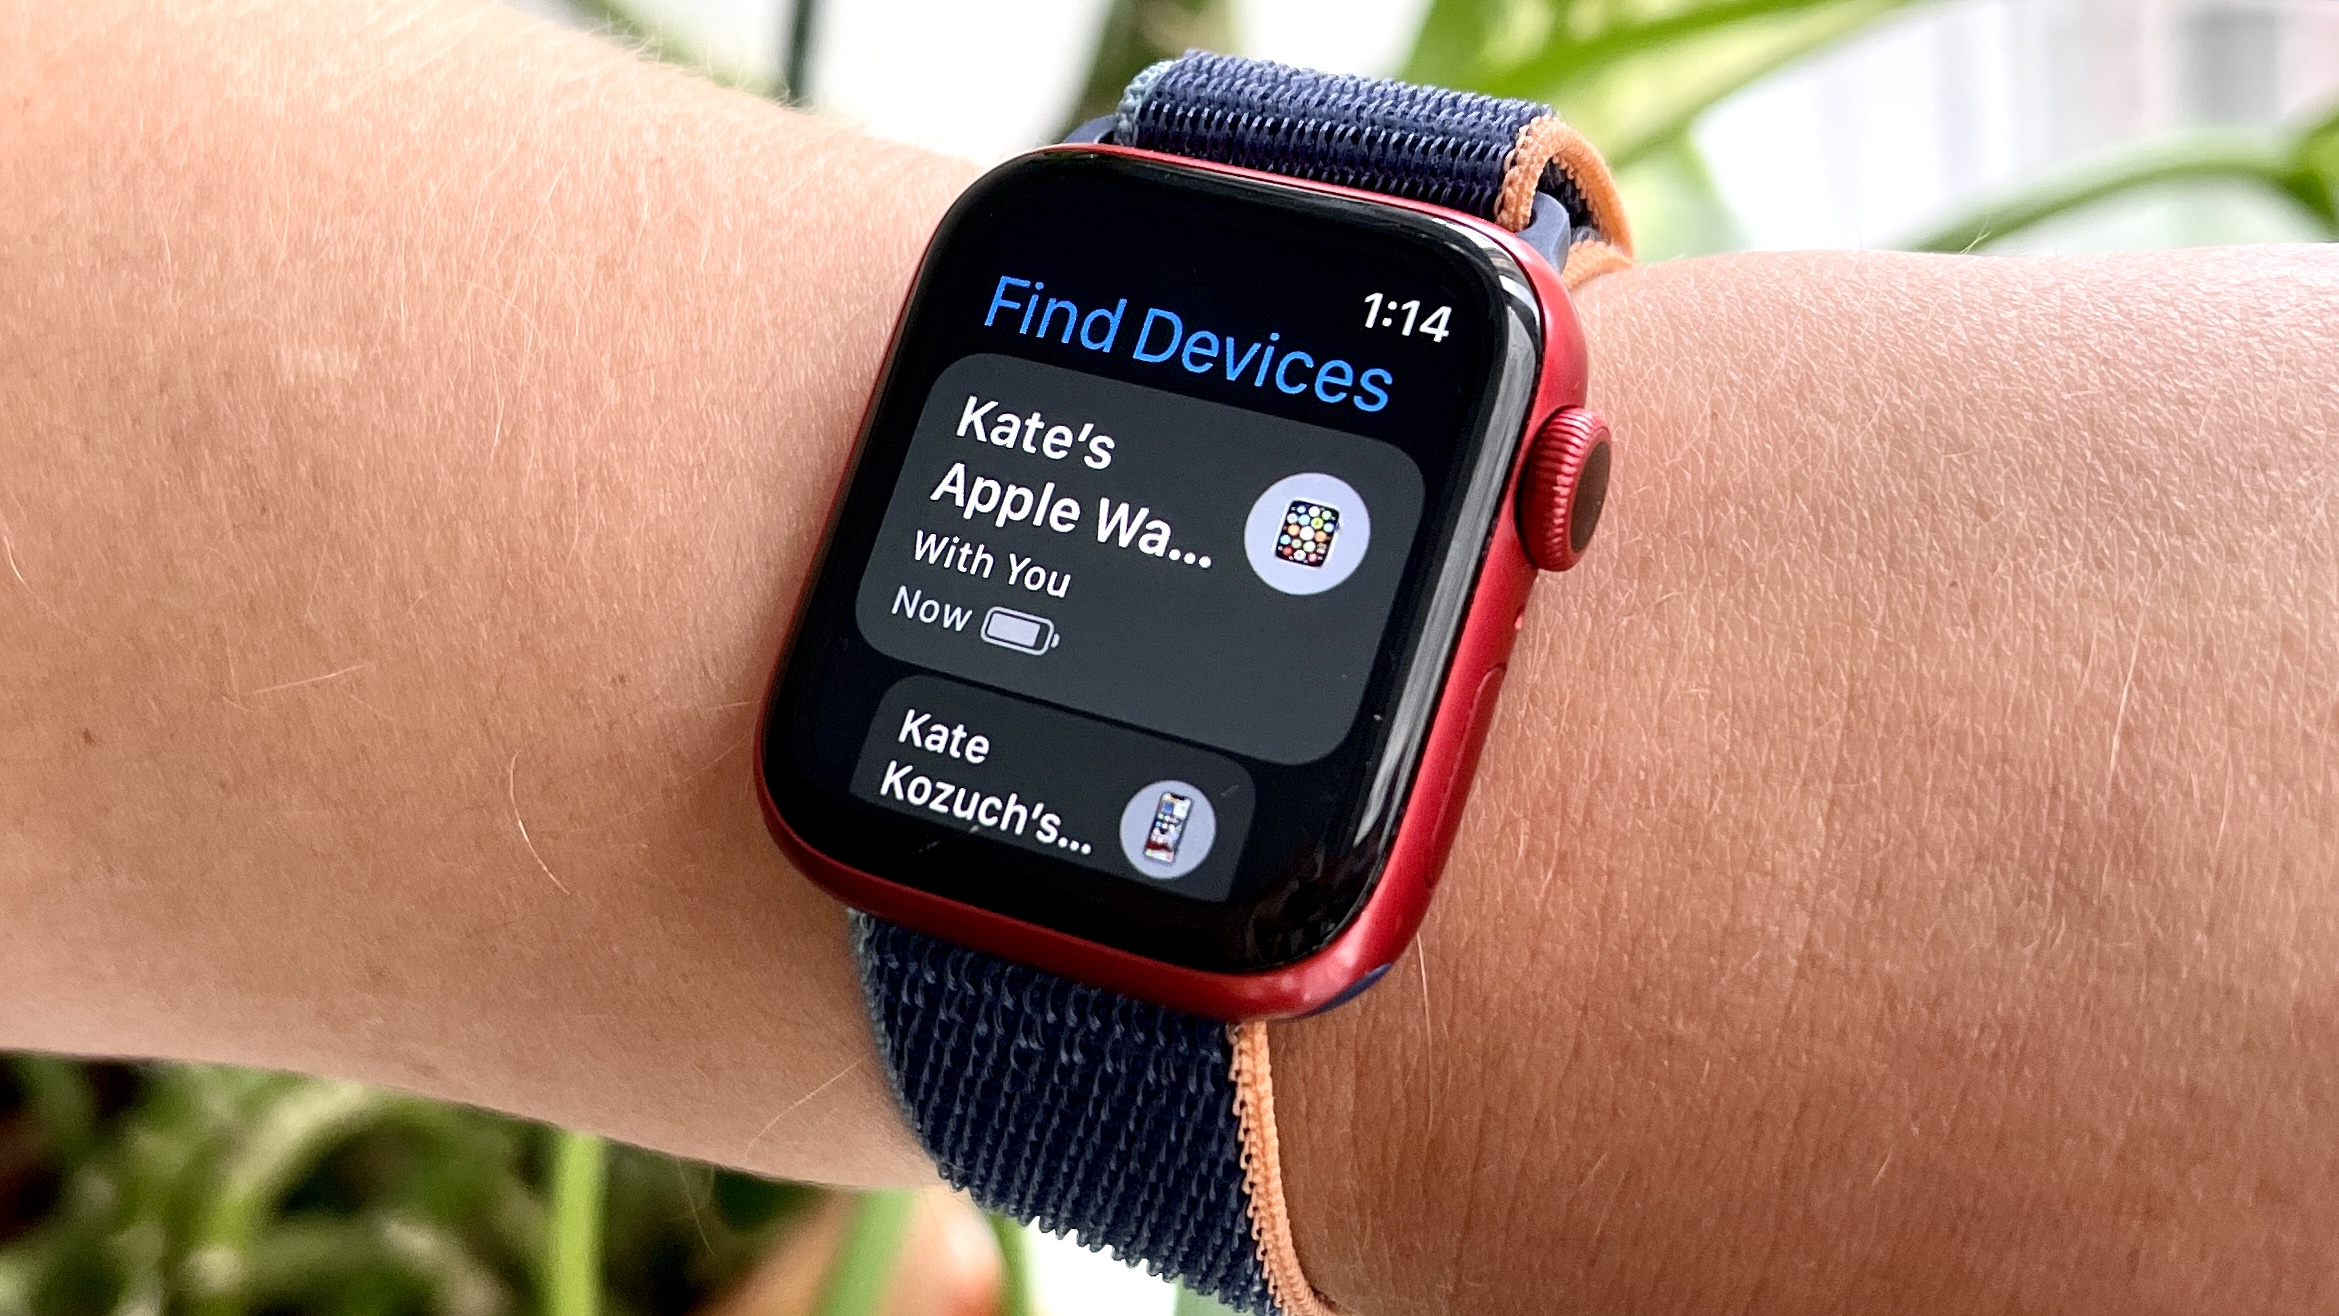 Apple Watch 6 with watchOS 8 find devices app